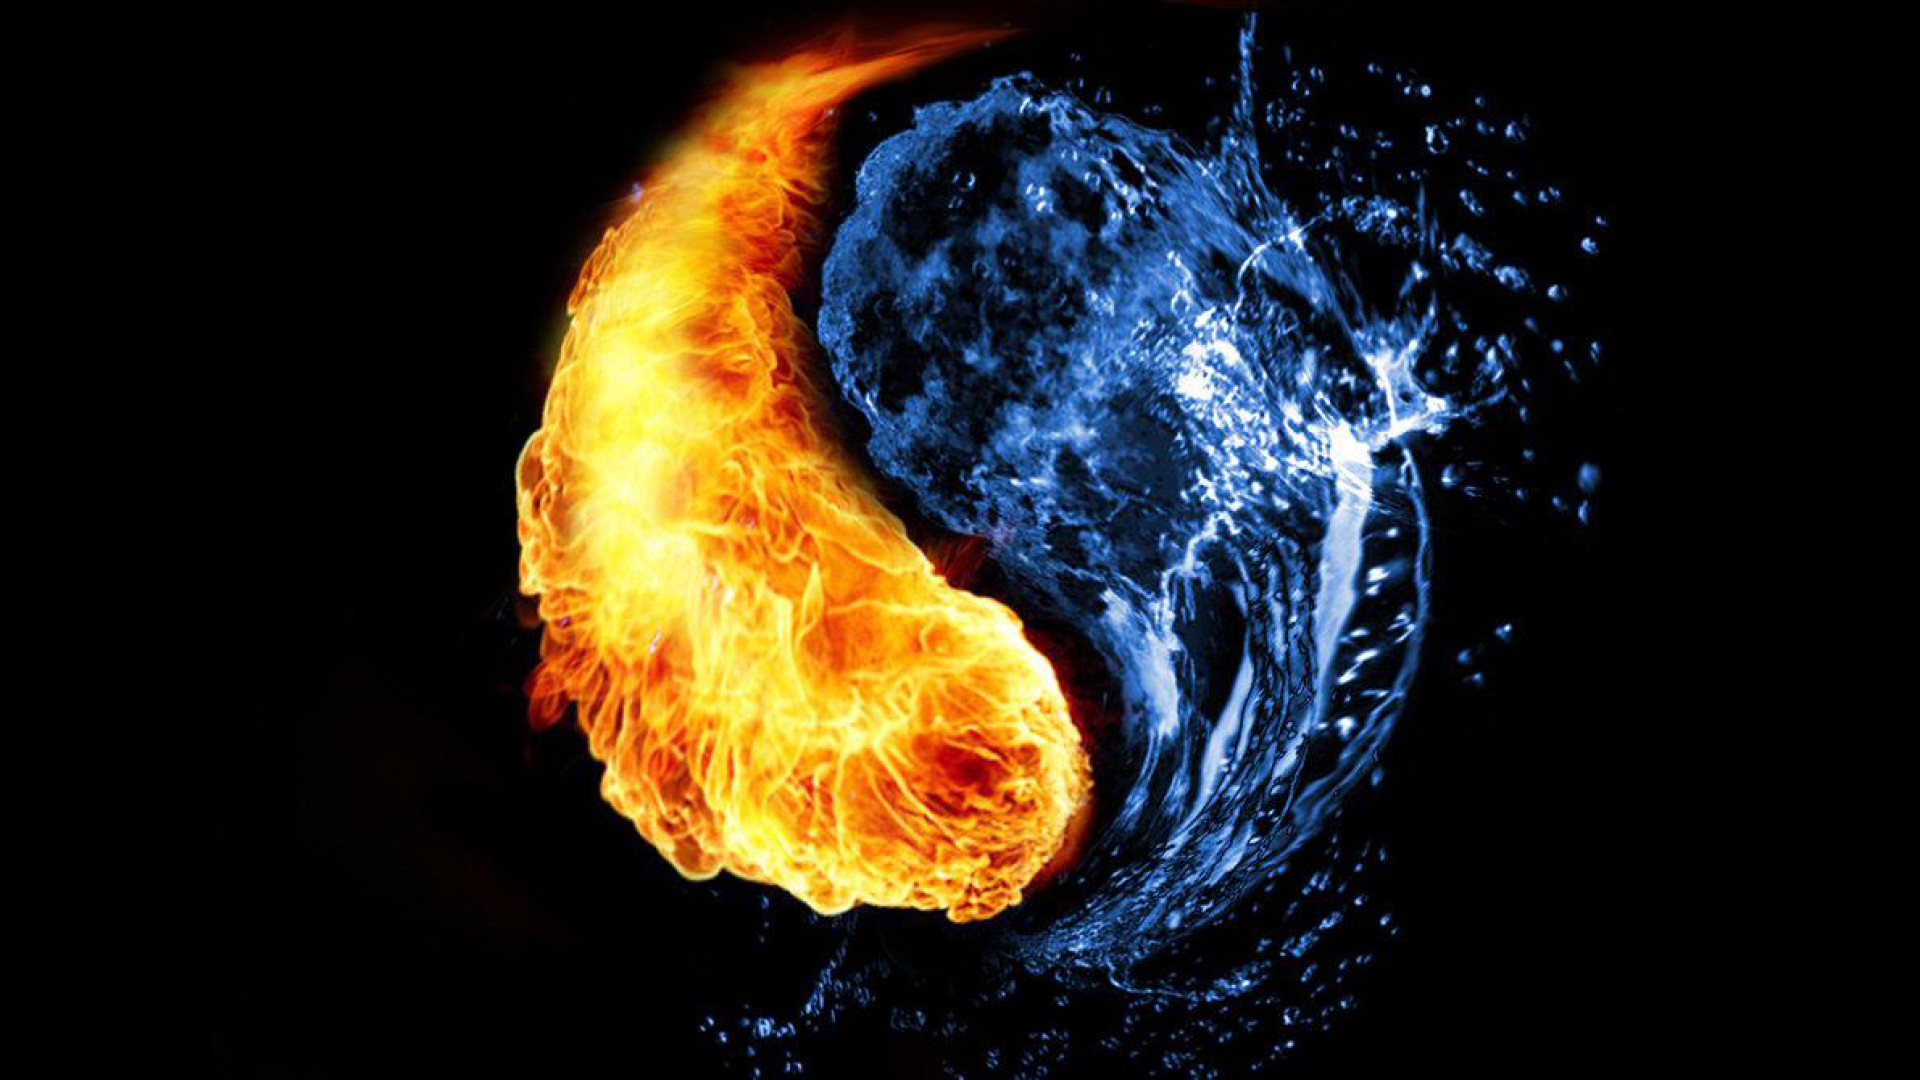 Water and fire wallpaper   SF Wallpaper